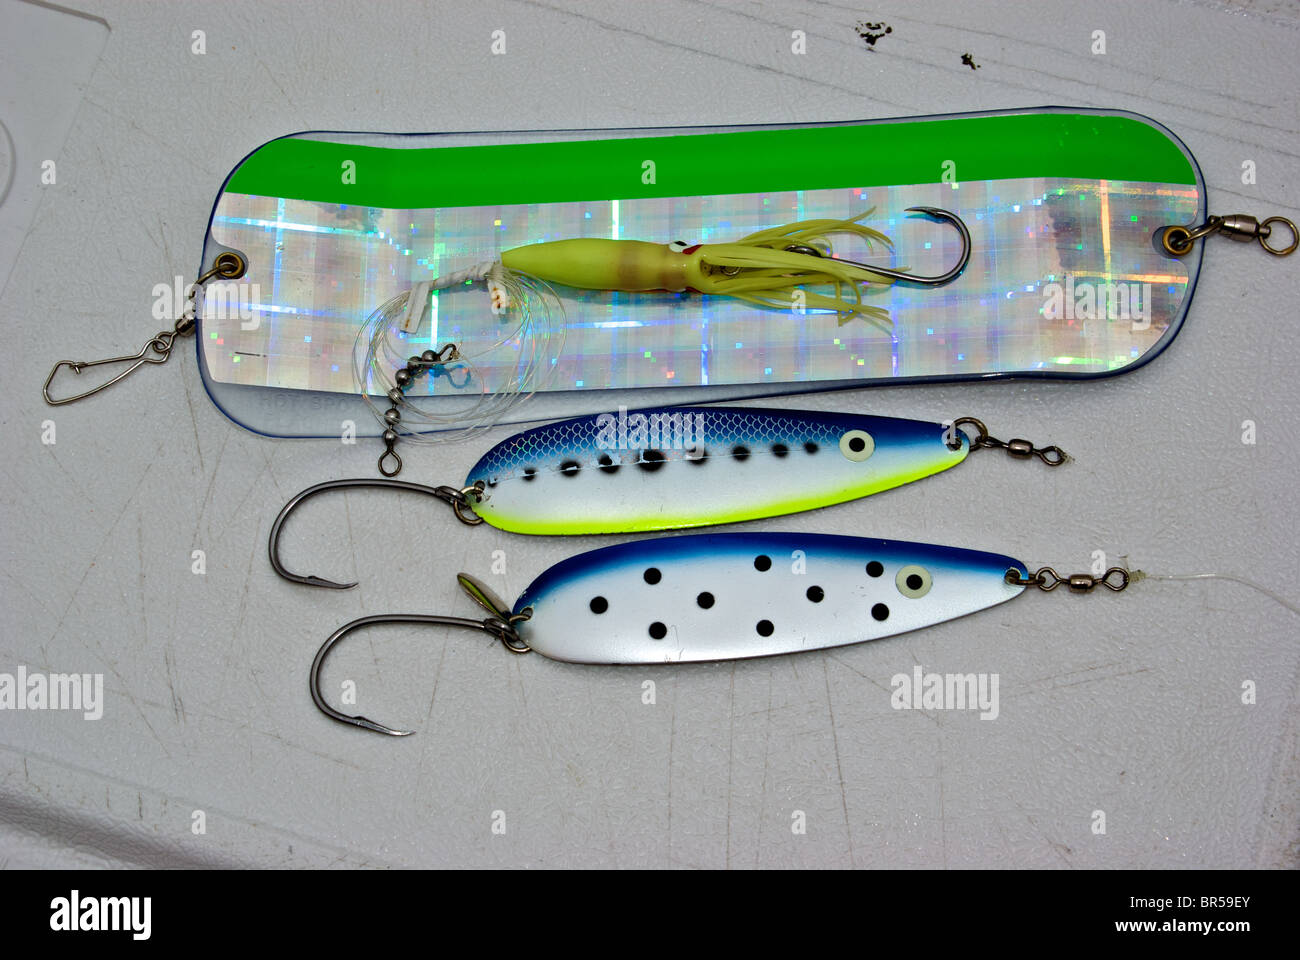 Salmon and halibut trolling lures spoon hoochie fishing lures with